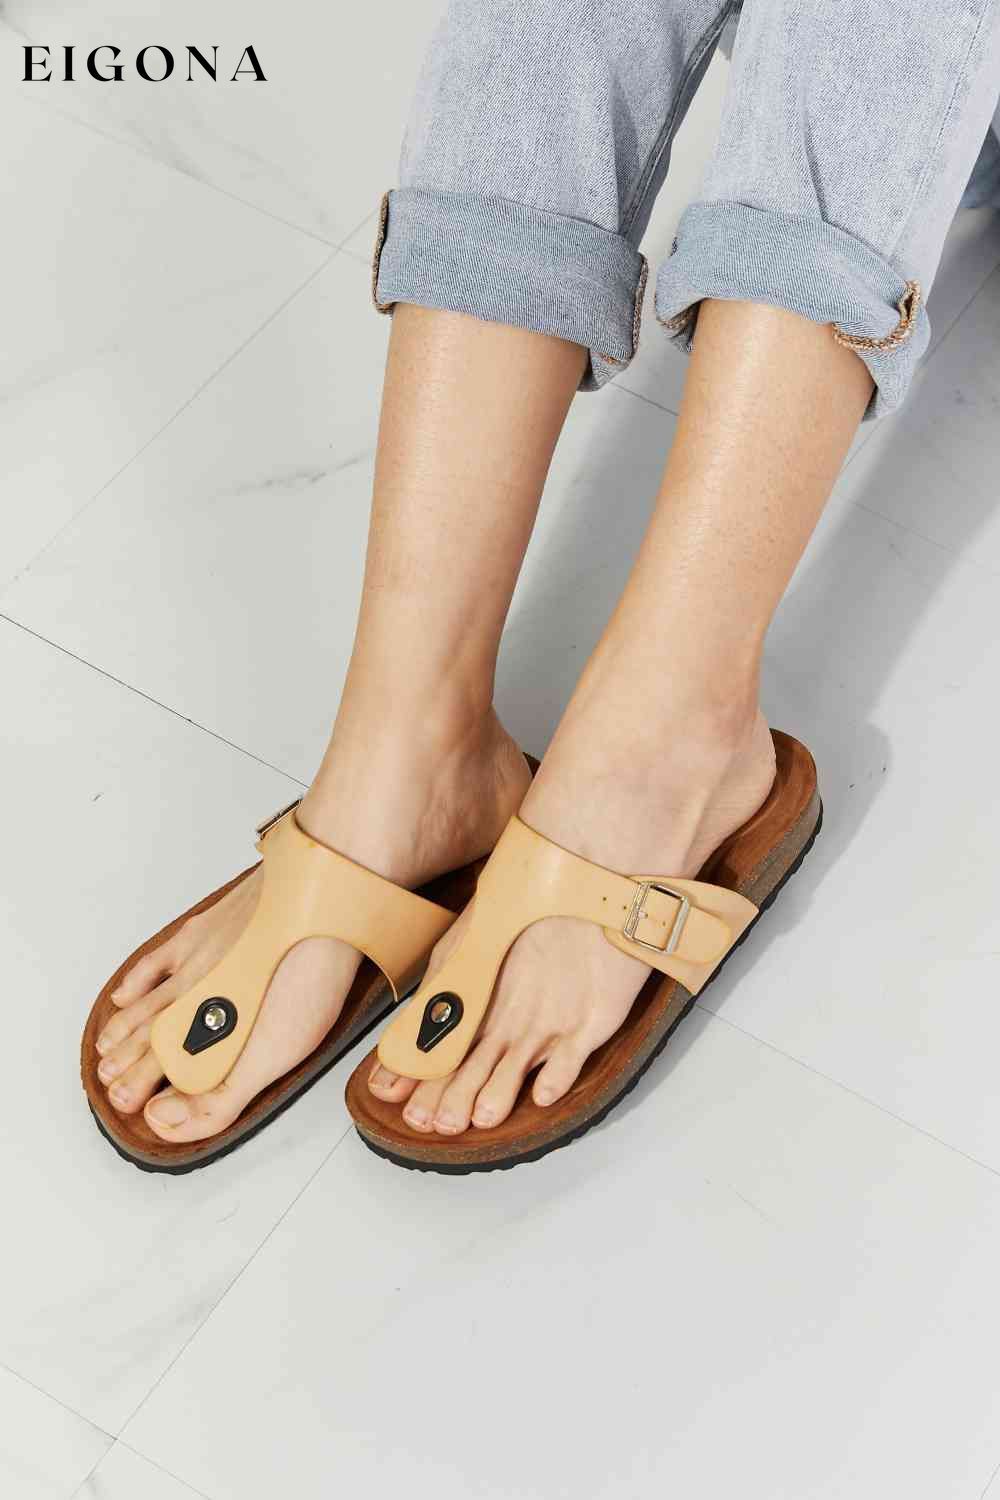 Drift Away T-Strap Flip-Flop in Sand Melody Ship from USA Shoes womens shoes